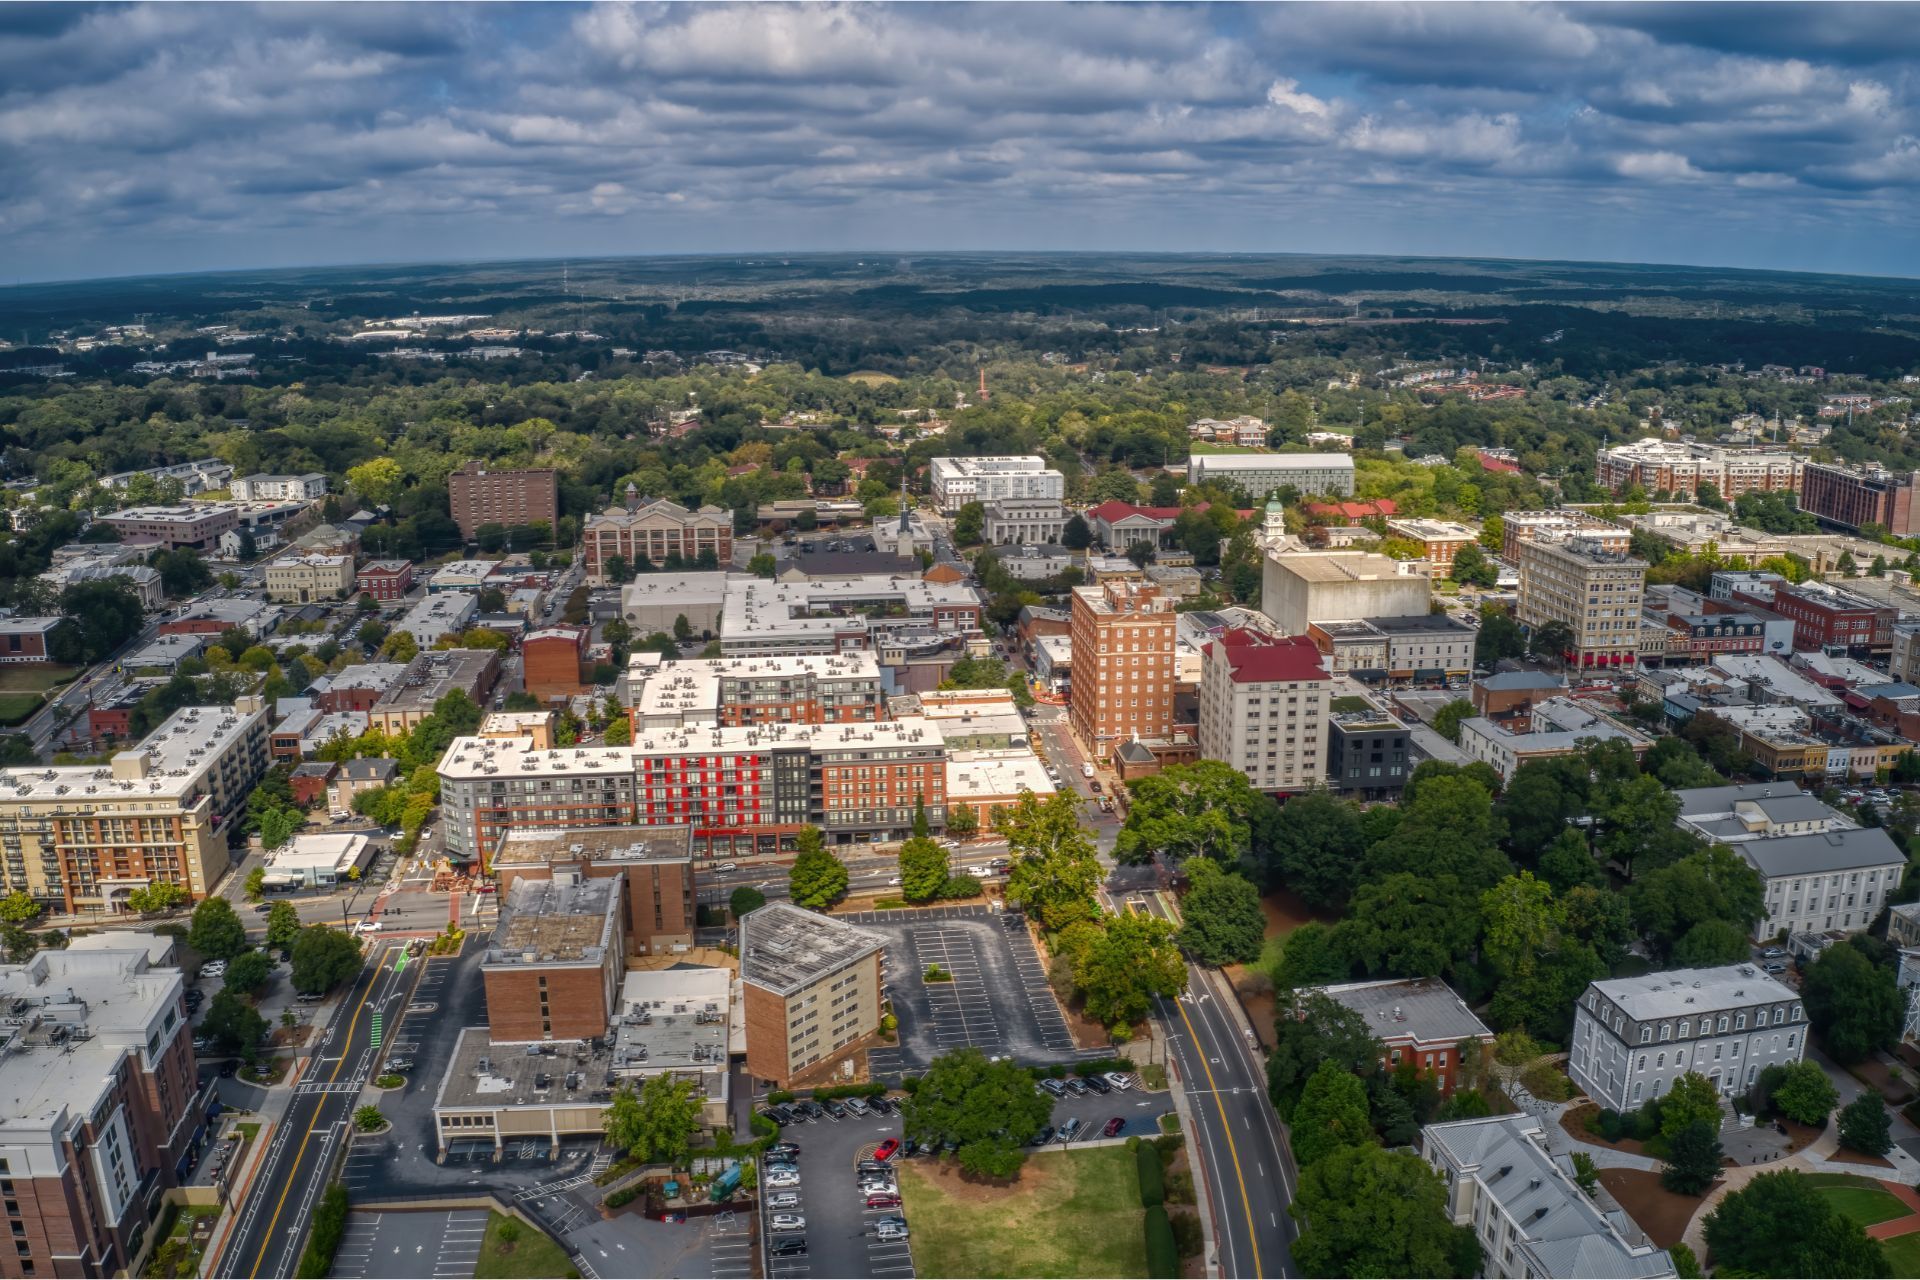 Aerial view of downtown Athens, Georgia, showcasing a mix of historical and modern architecture amid lush greenery. The city's landscape blends tree-lined streets with buildings of varying heights, including a prominent white structure in the center. Roads intersect neatly, with patches of parking lots and the outskirts transitioning into a dense canopy of trees stretching to the horizon under a partly cloudy sky.